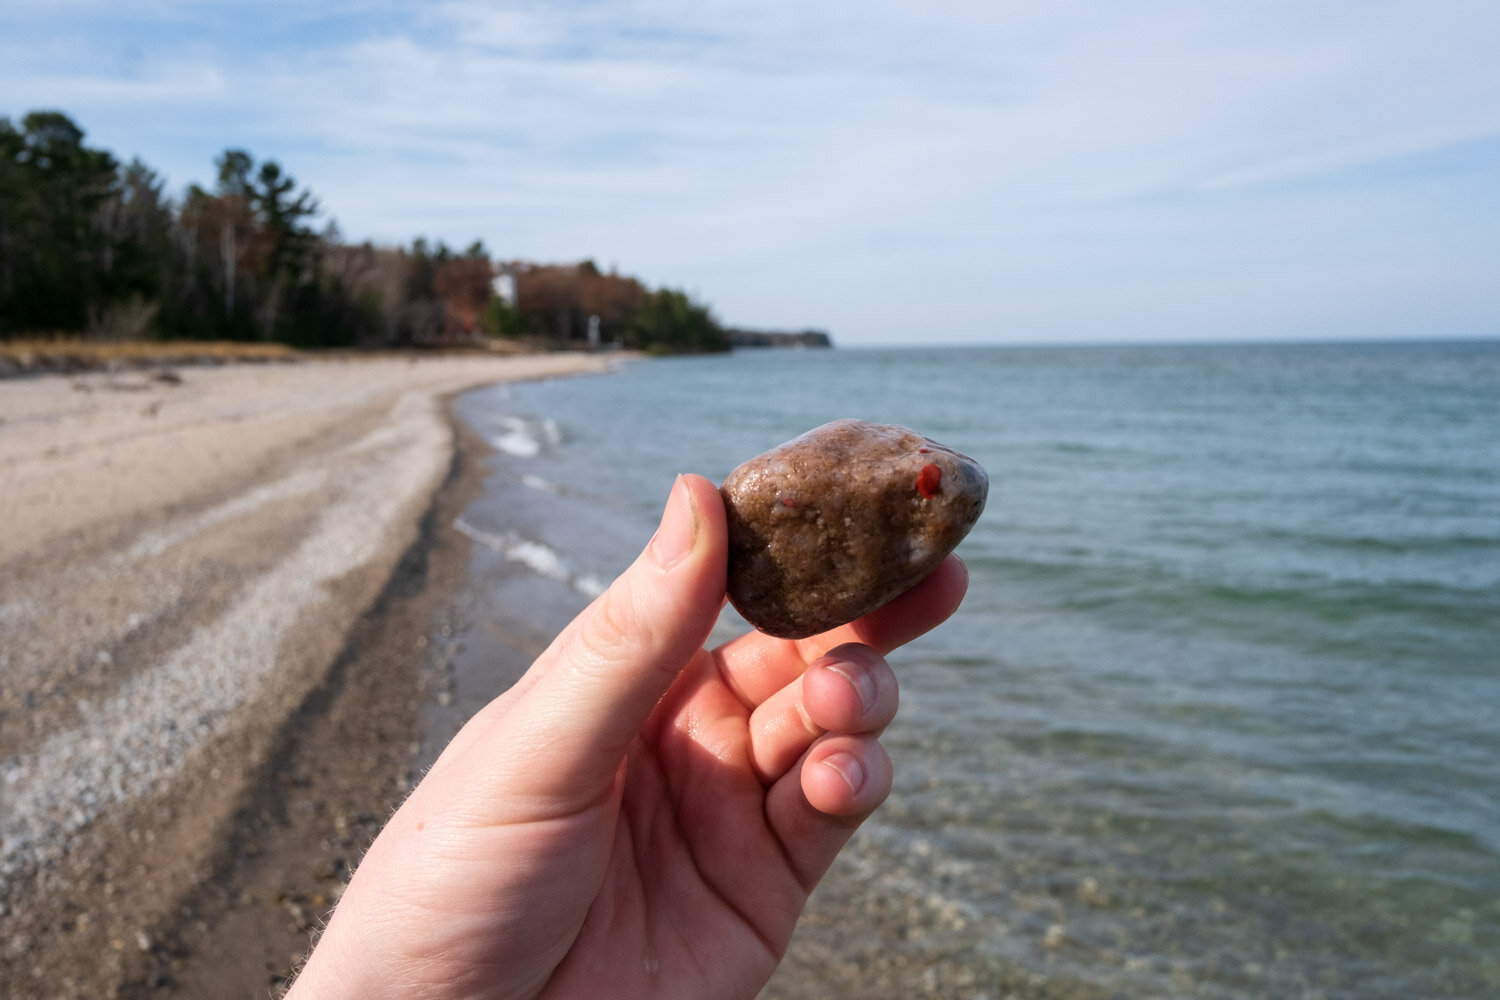 Rock & Fossil Hunting in Southwest Michigan